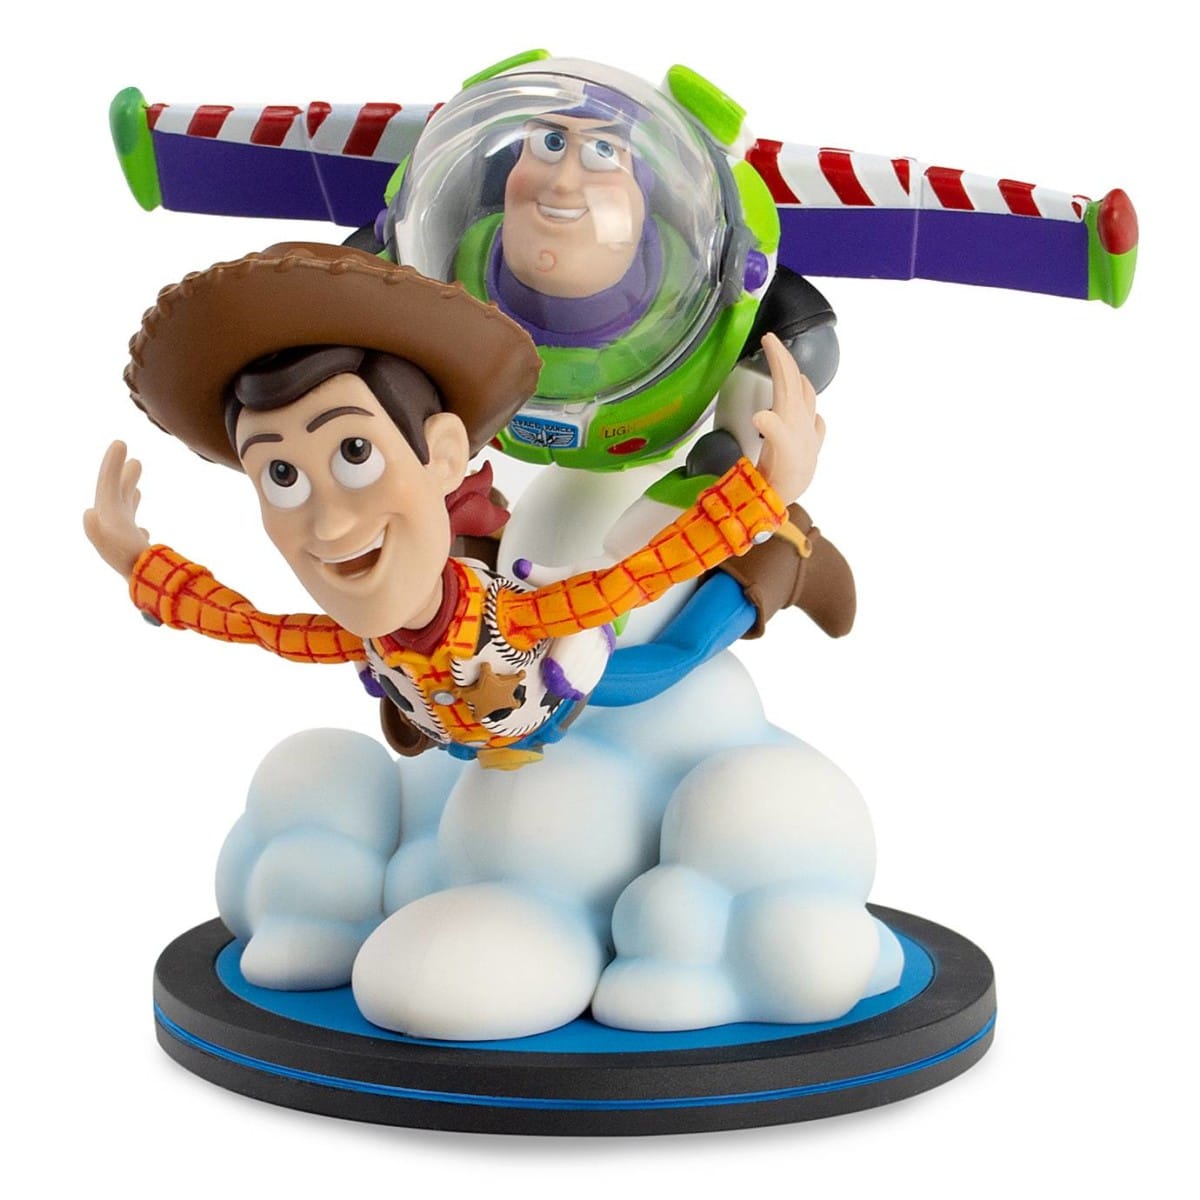 Woody and Buzz Lightyear Q-Fig Max by QMx – Toy Story 25th Anniversary $39.99